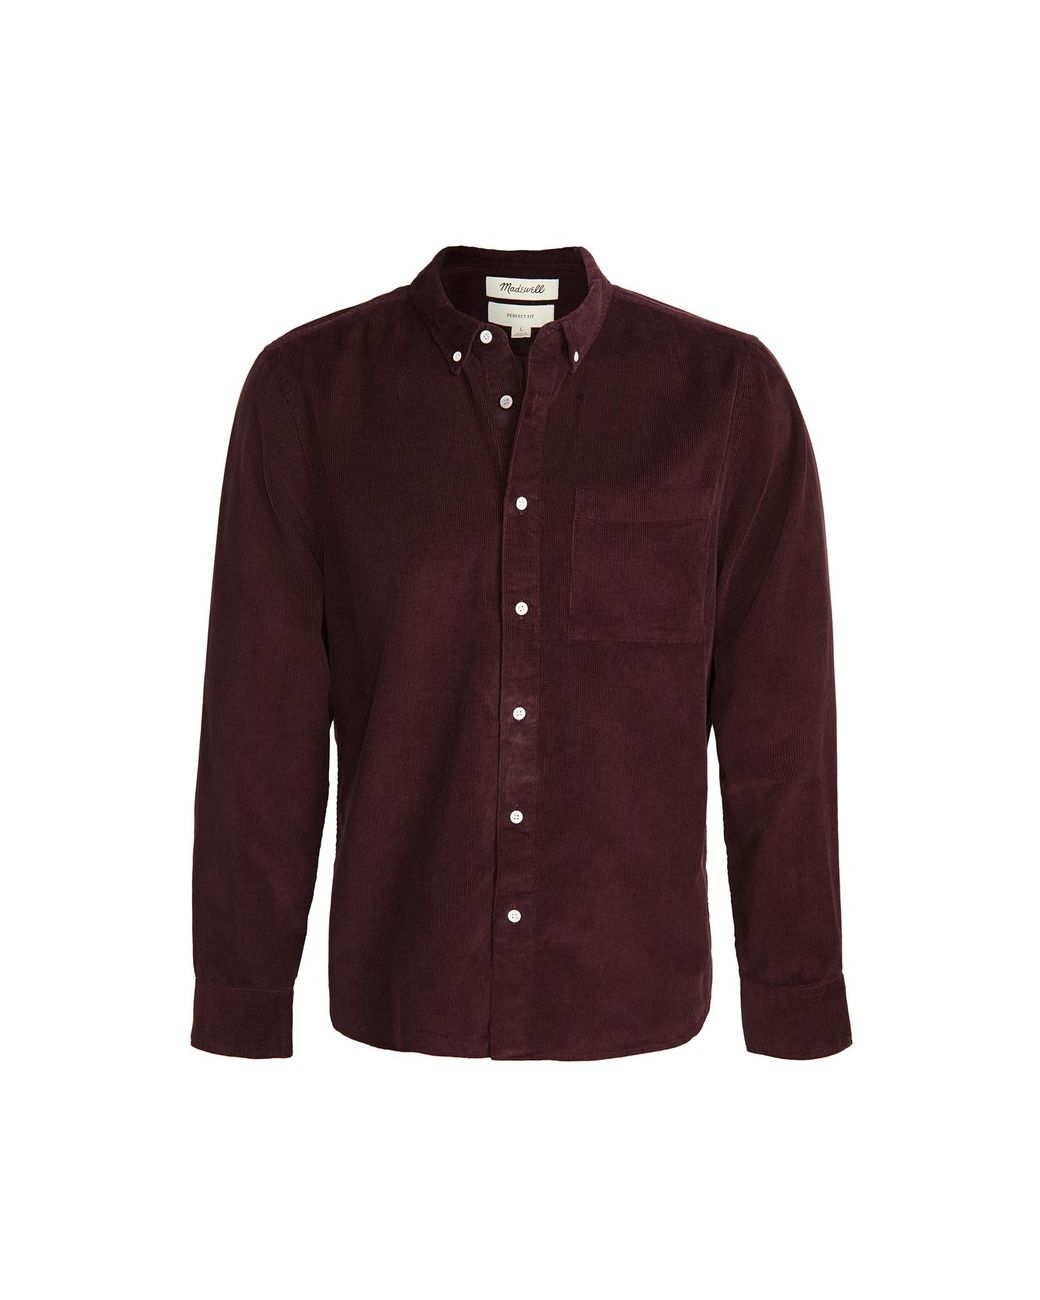 Madewell Corduroy Perfect Button Down Shirt in Purple for Men - Lyst